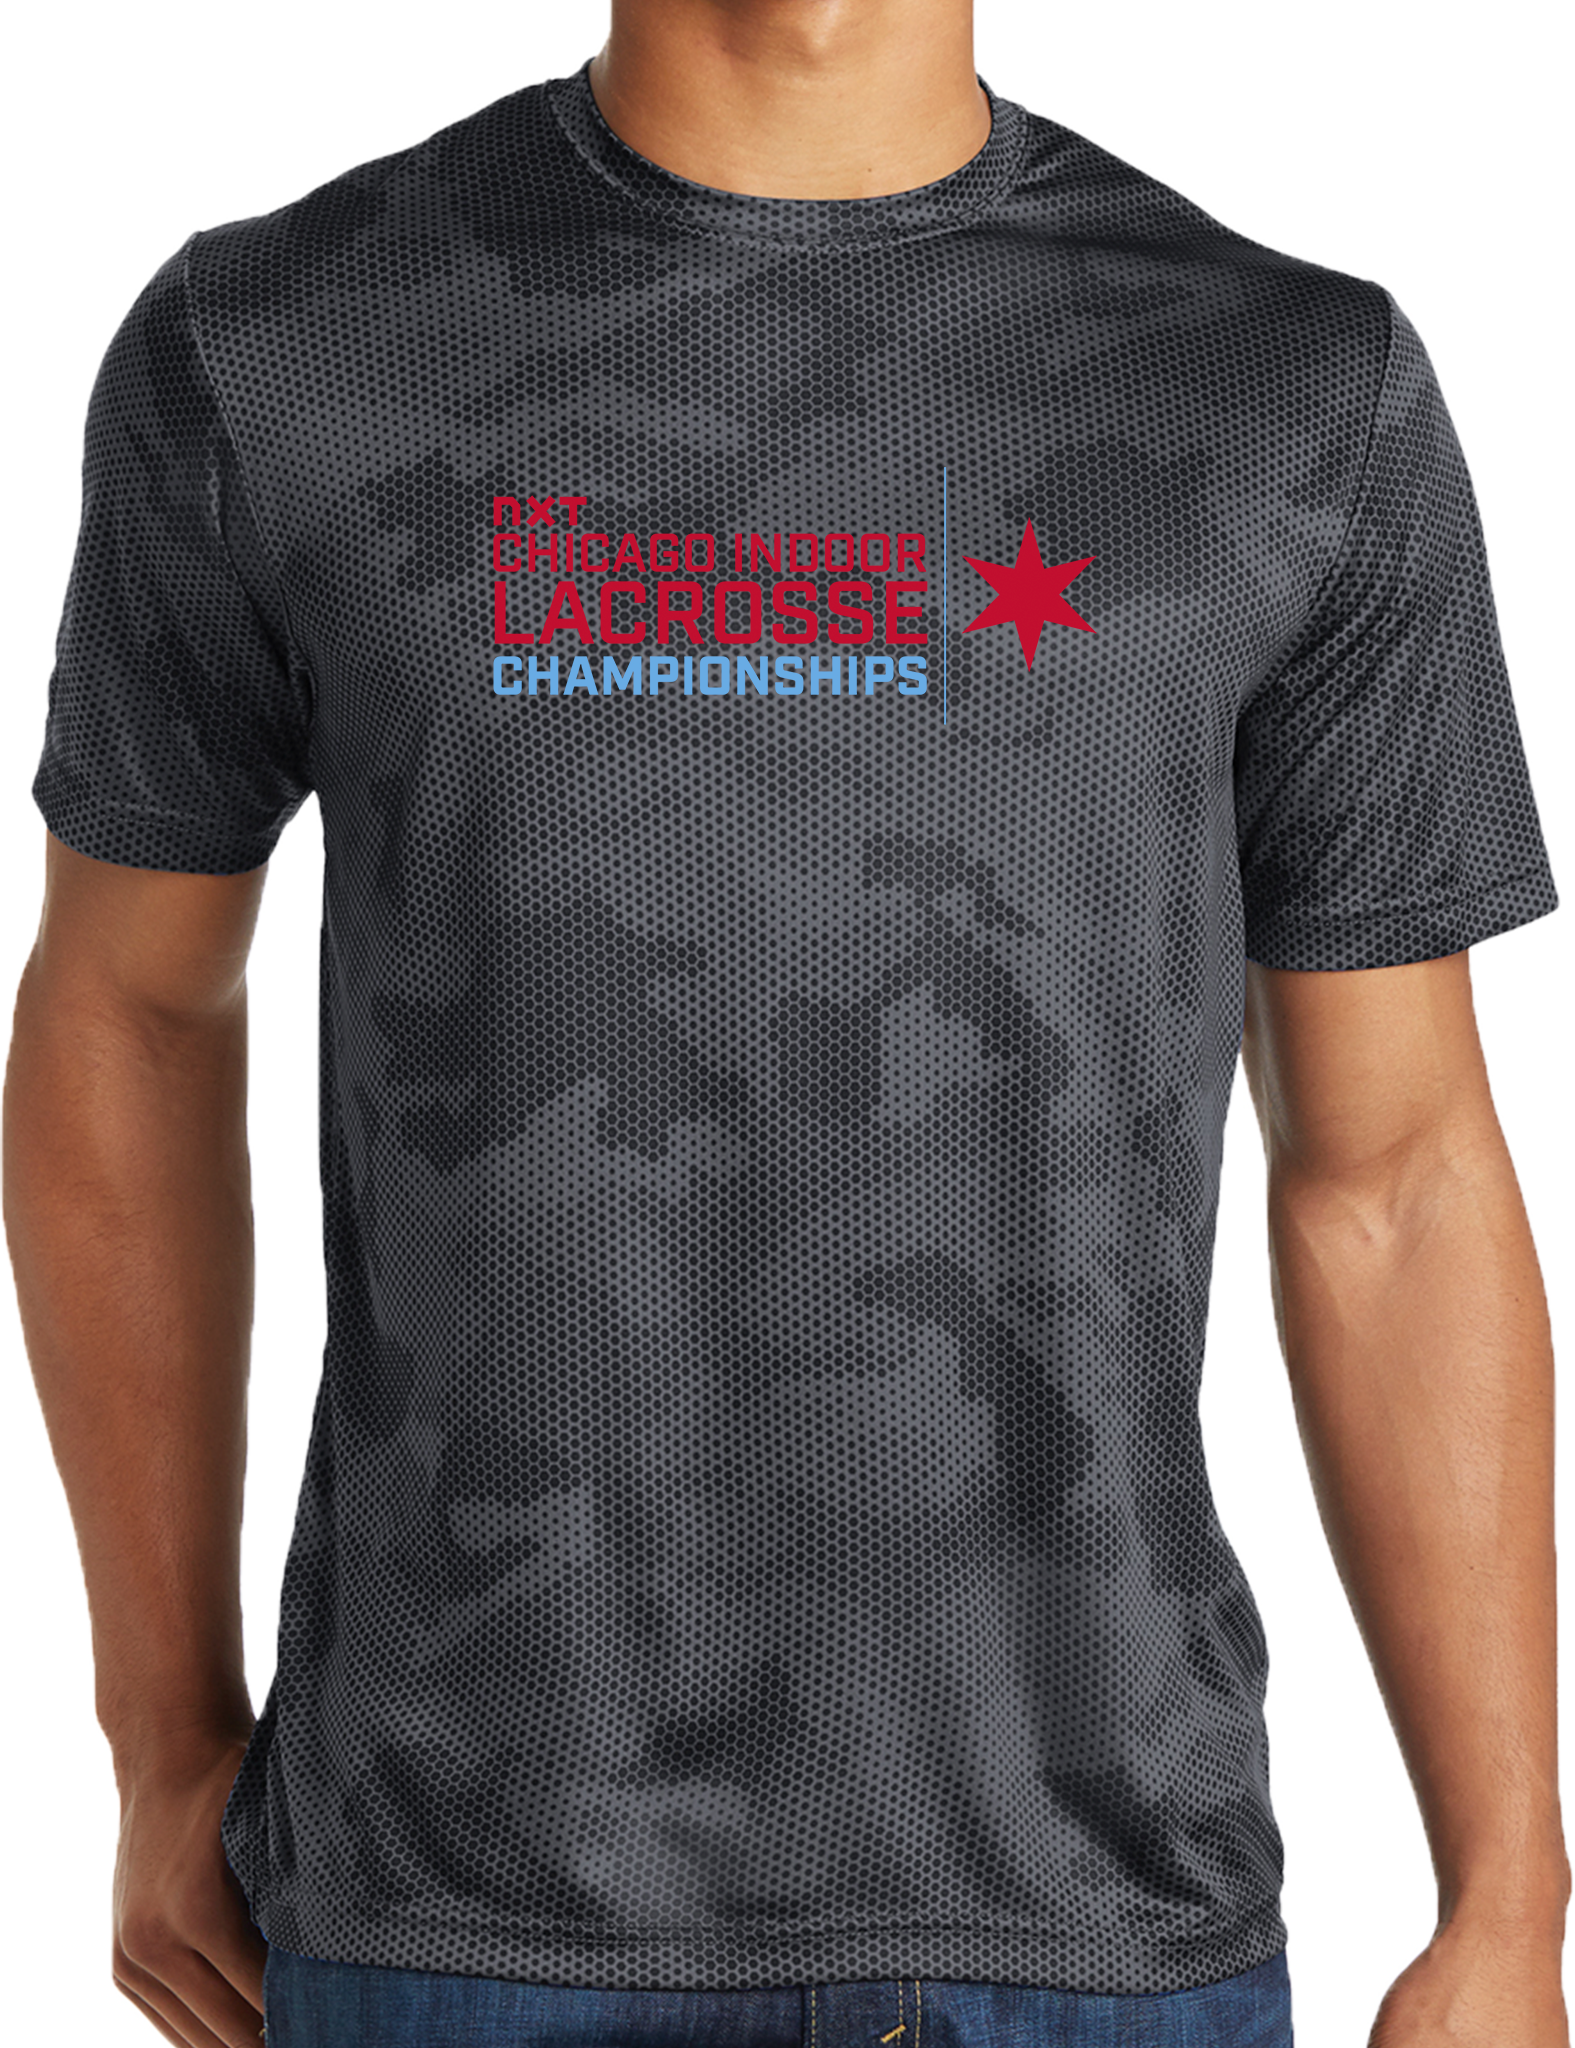 PERFORMANCE SHIRTS - 2023 Chicago Indoor Lacrosse Championships